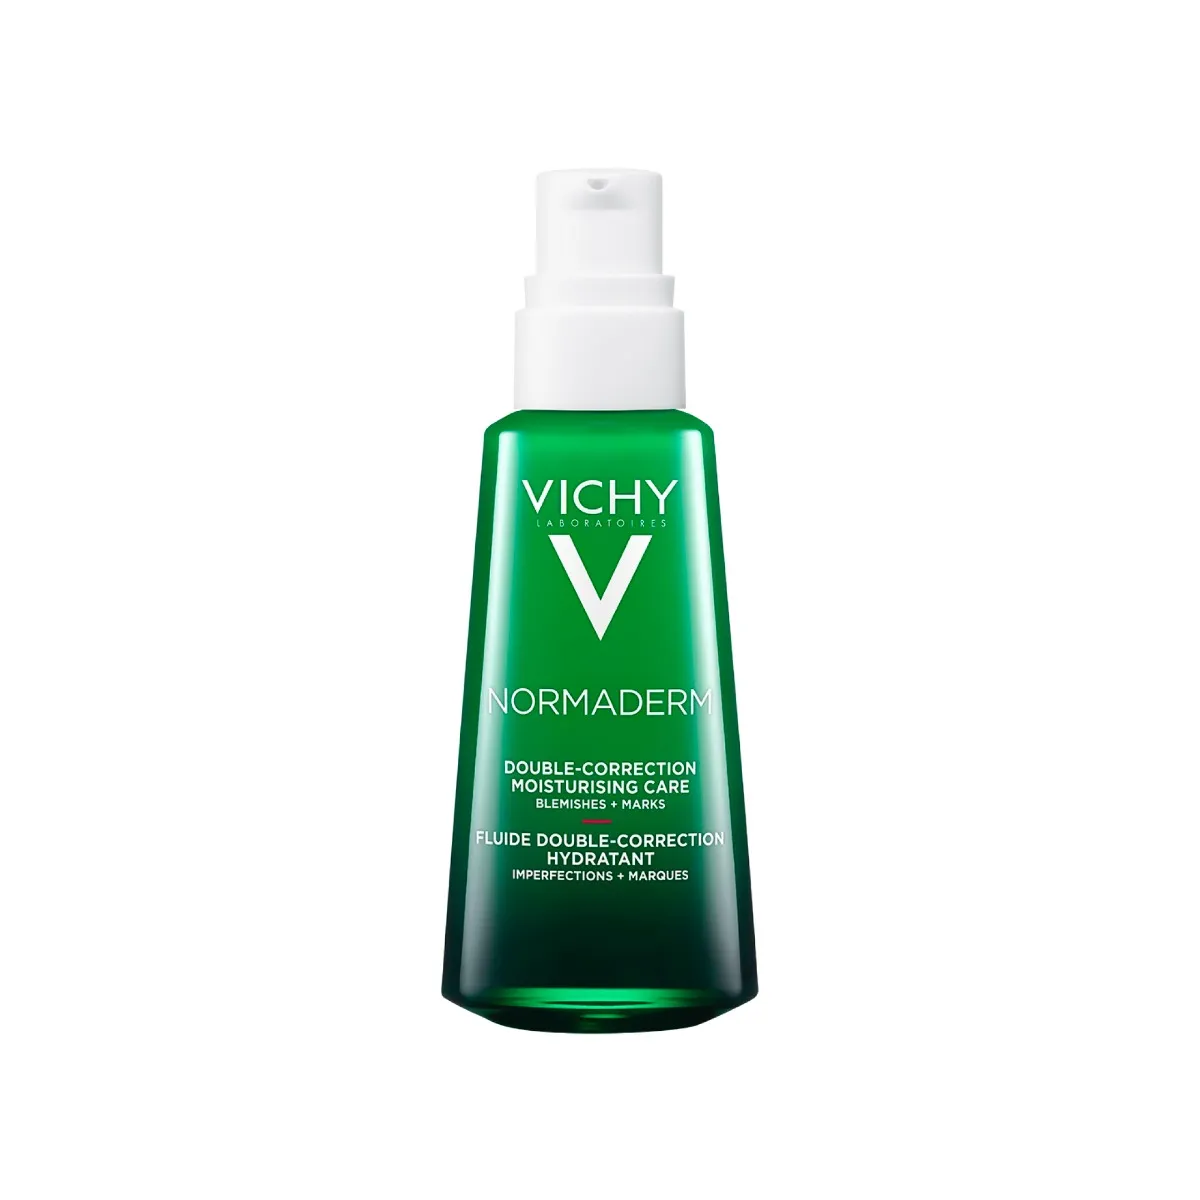 VICHY NORMADERM PHYTOSOLUTION 50 ML